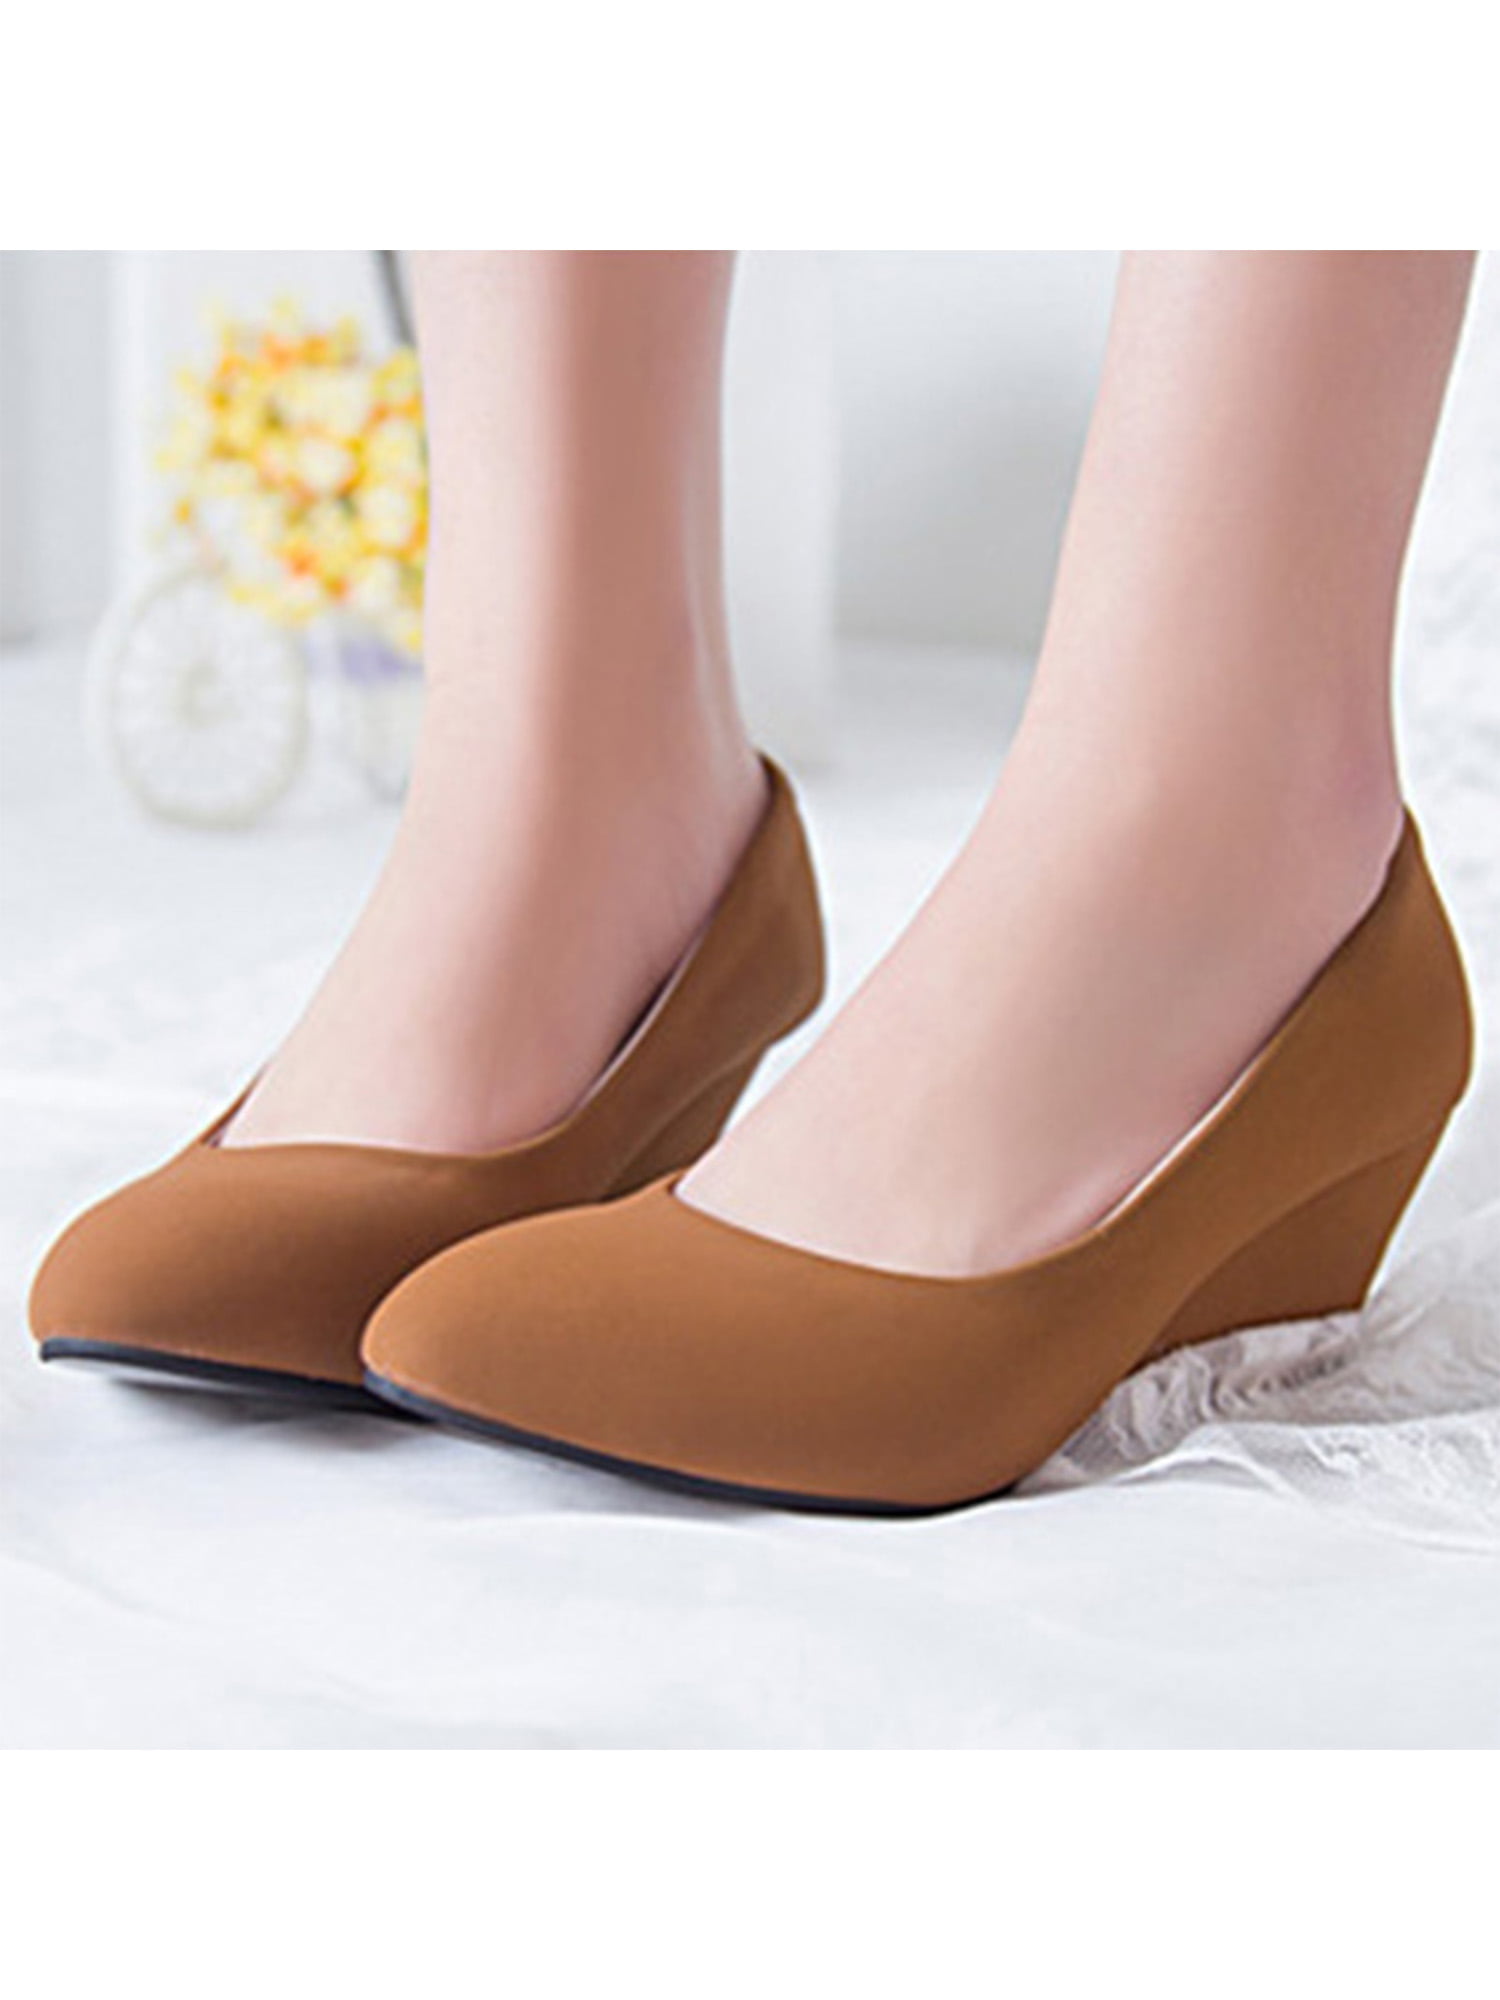 Women's High Wedge Heel Shoes Faux Leather Slip On Round Toe Work Office Pumps L 